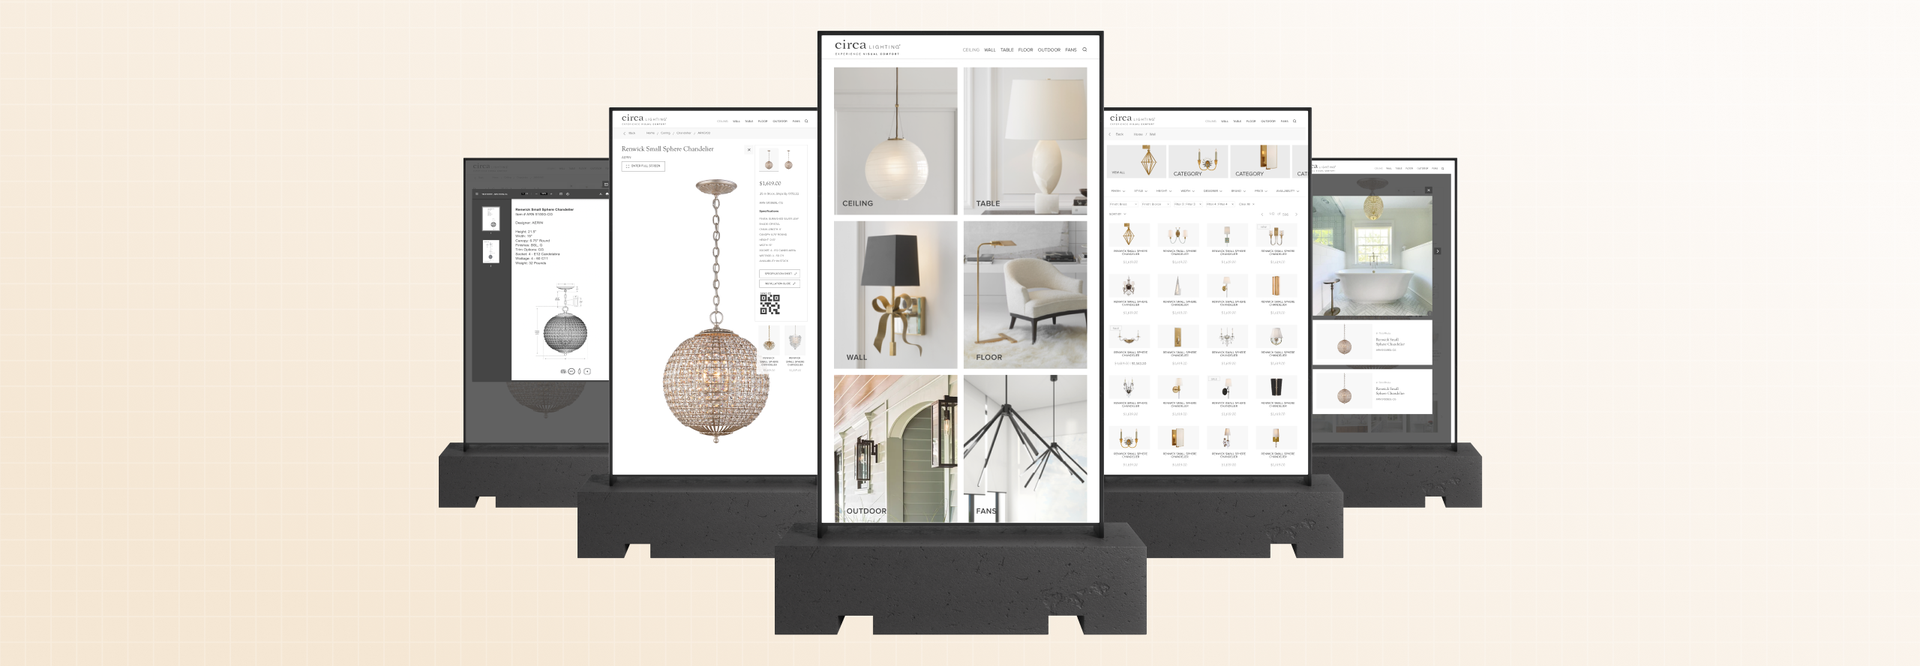 Showcase image showing the Visual Comfort retail application on displays